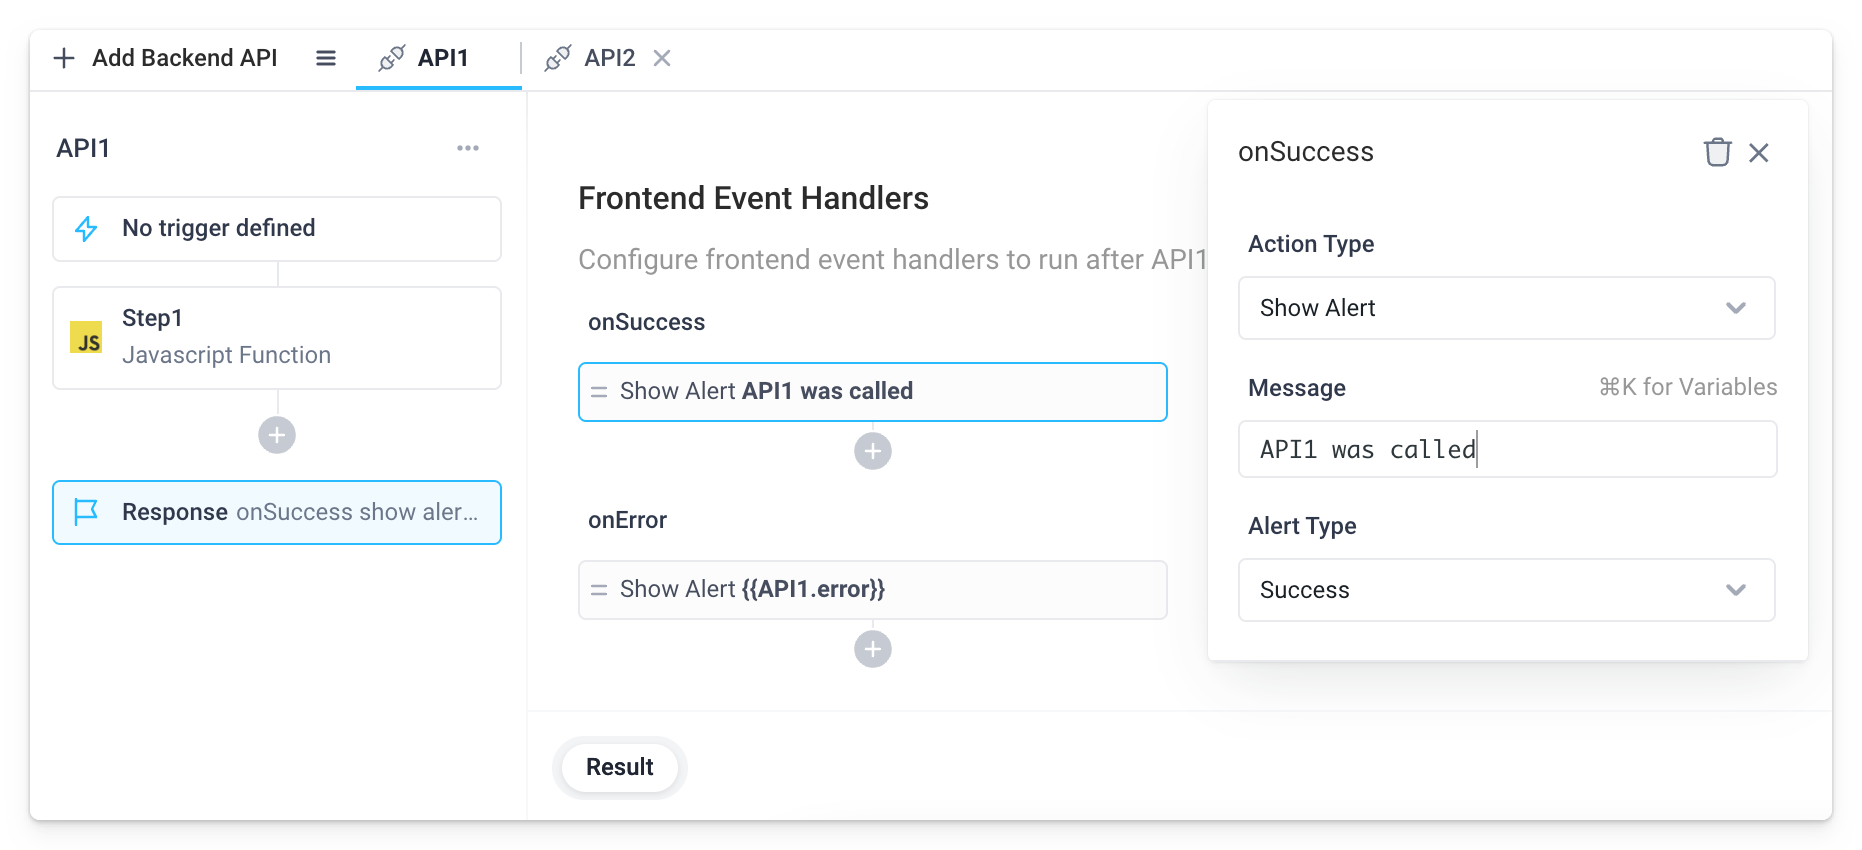 A Show Alert action type was added to the onSuccess event handler for both APIs.